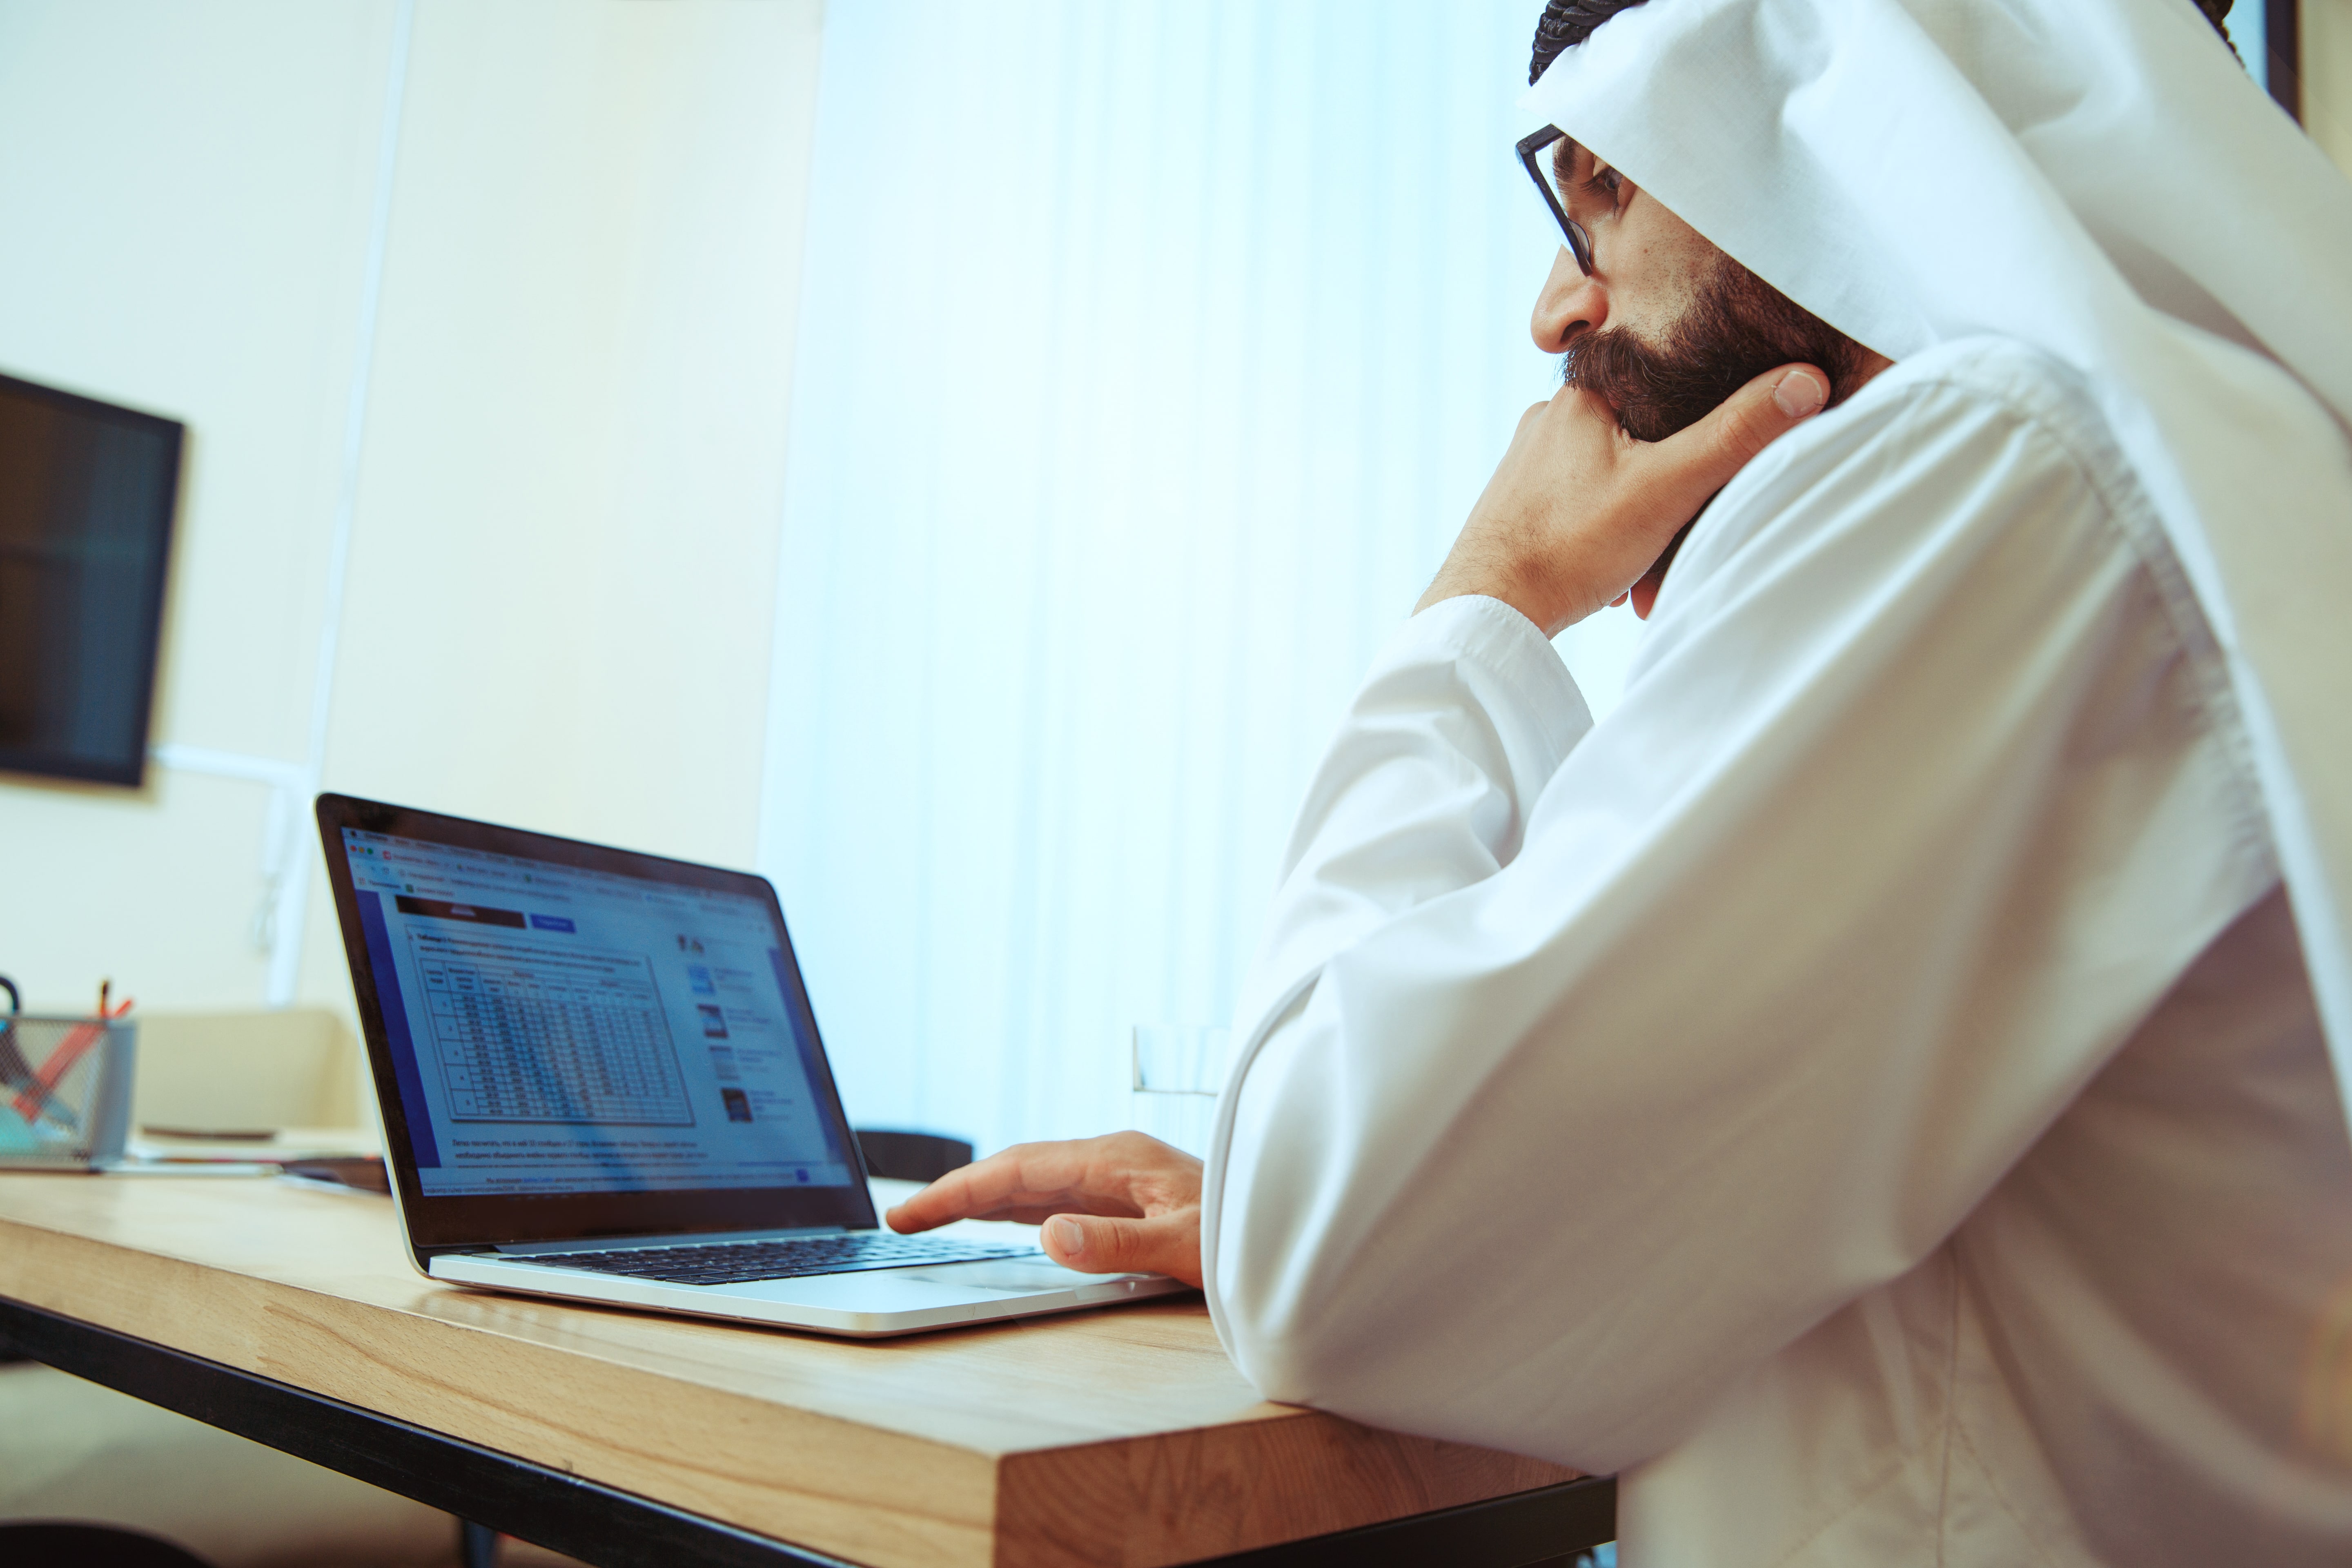 Sharjah is making significant investments in full digital transition